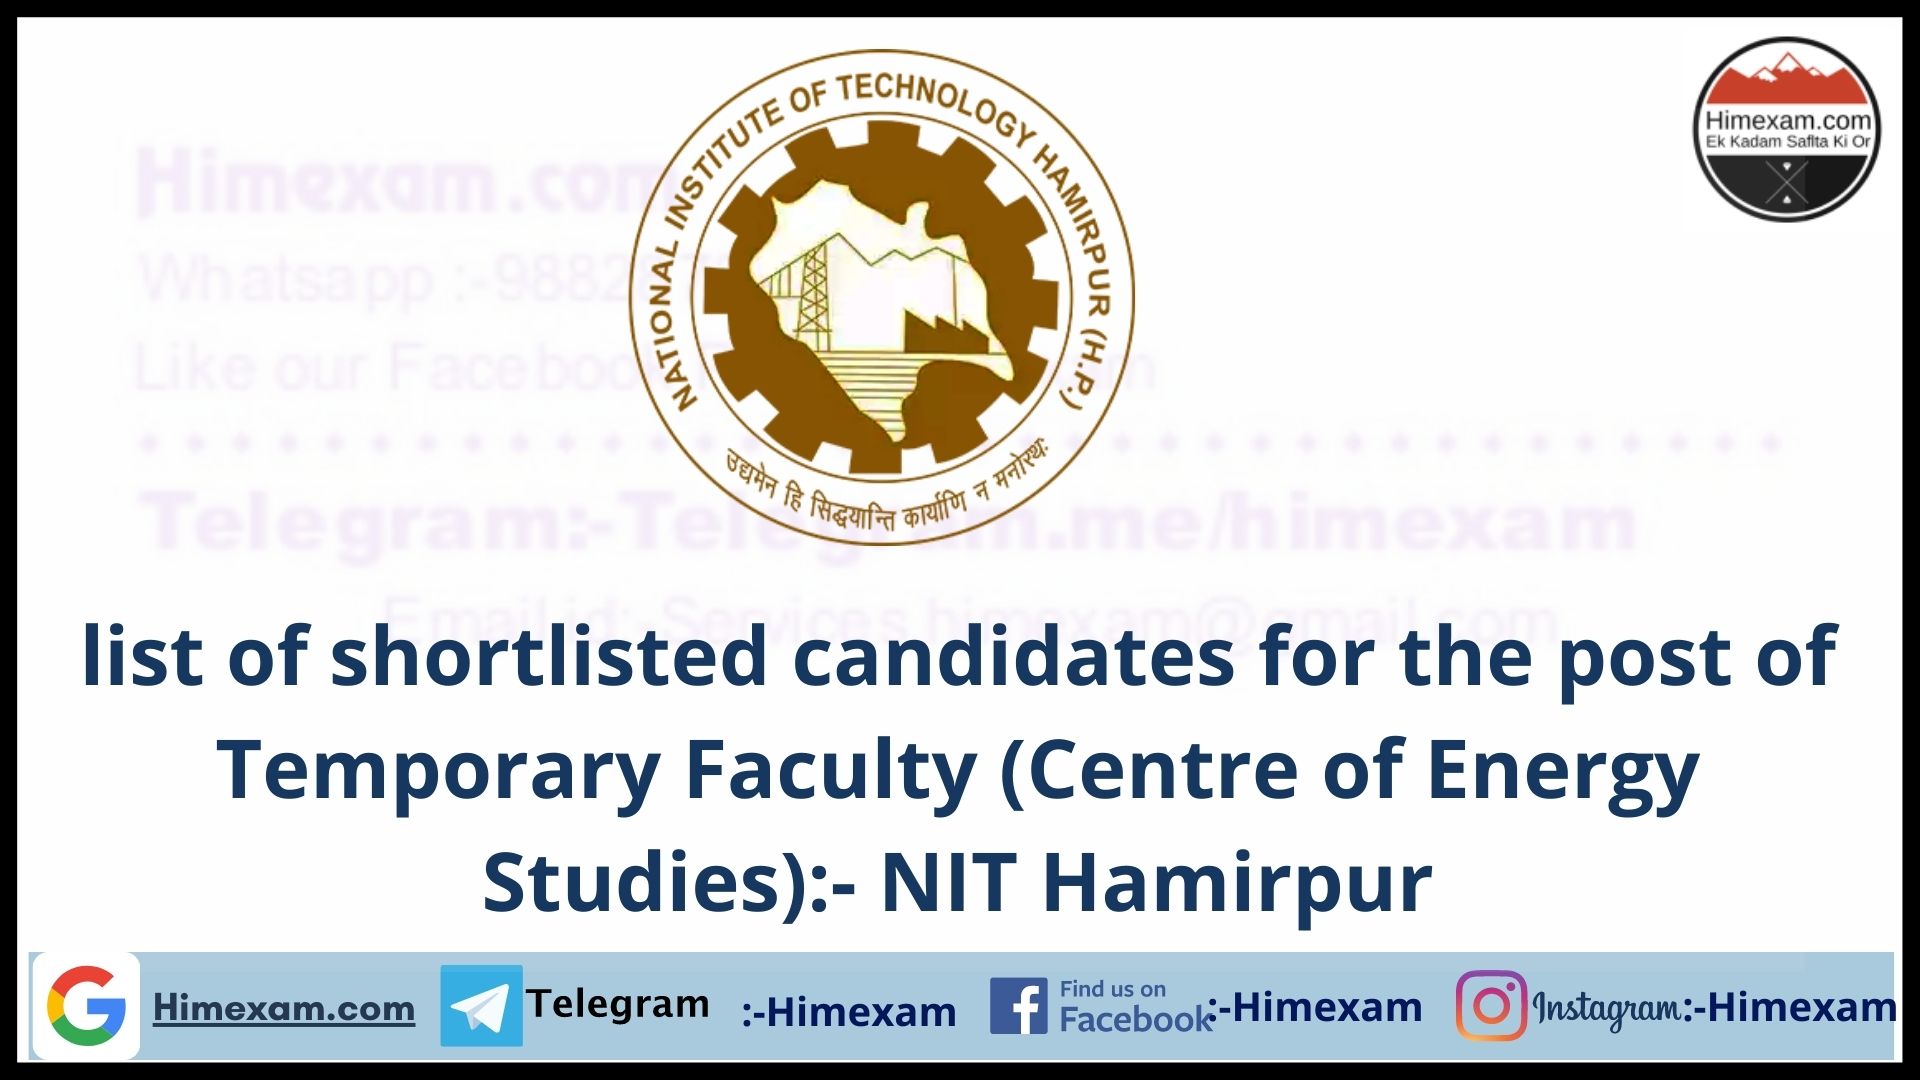 list of shortlisted candidates for the post of Temporary Faculty (Centre of Energy Studies):- NIT Hamirpur